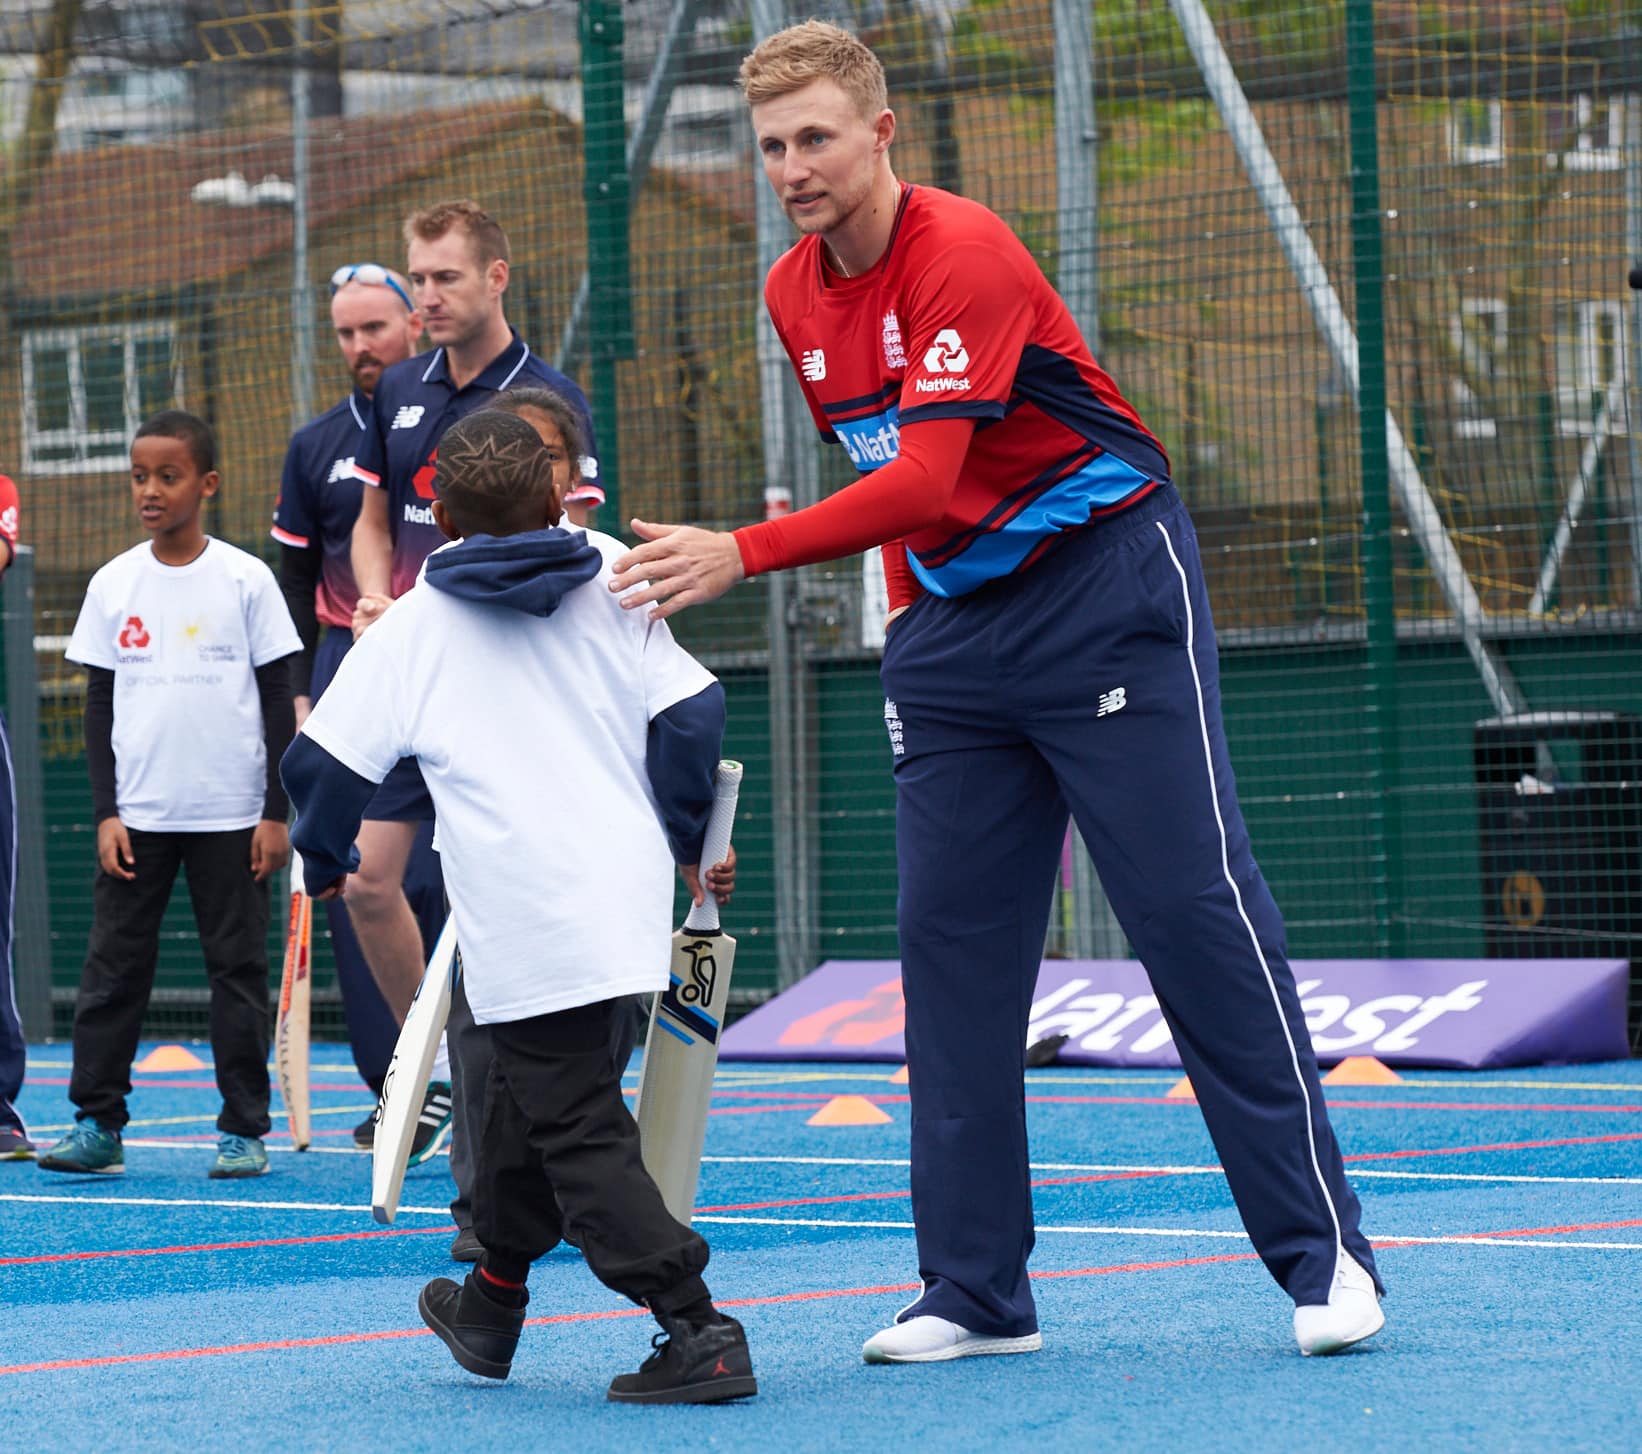 England players plays visually impaired cricket